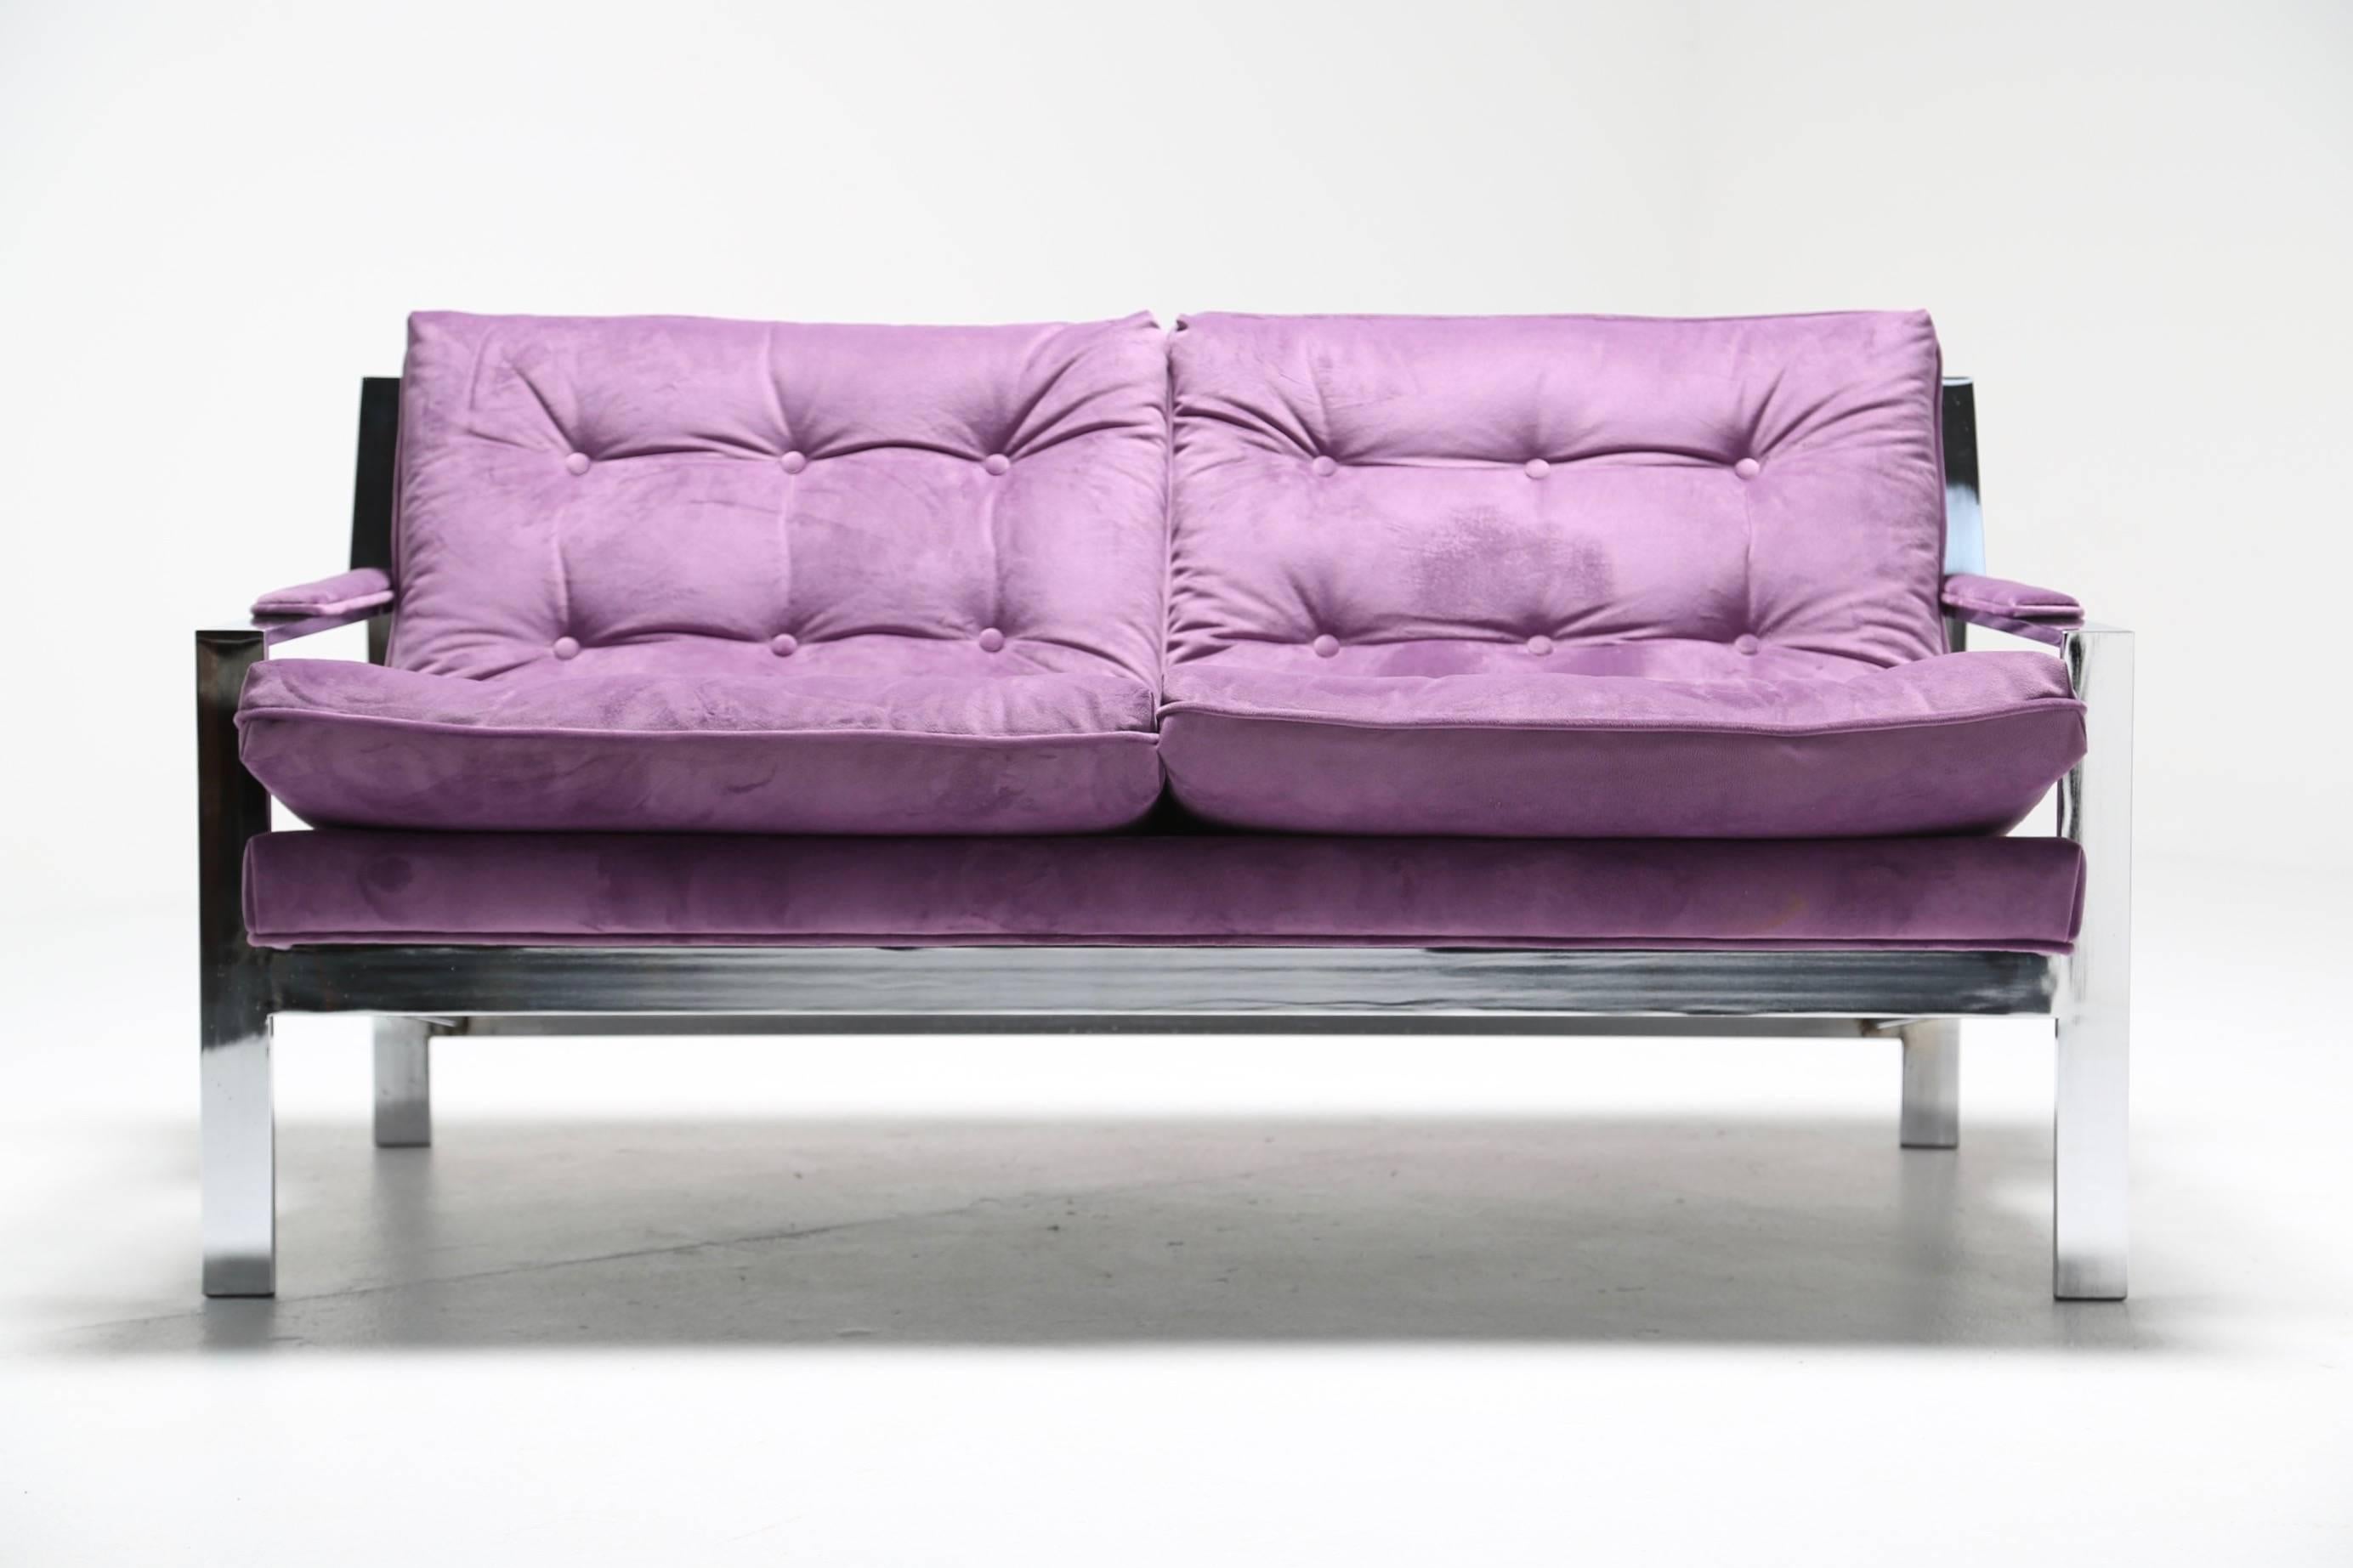 Cy Mann of New York designed this fabulous vintage loveseat sofa in the 1970s. It's classic good looks are not to be confused with those of Milo Baughman, although you would be forgiven for thinking that. Plump sumptuous cushions are supported by a